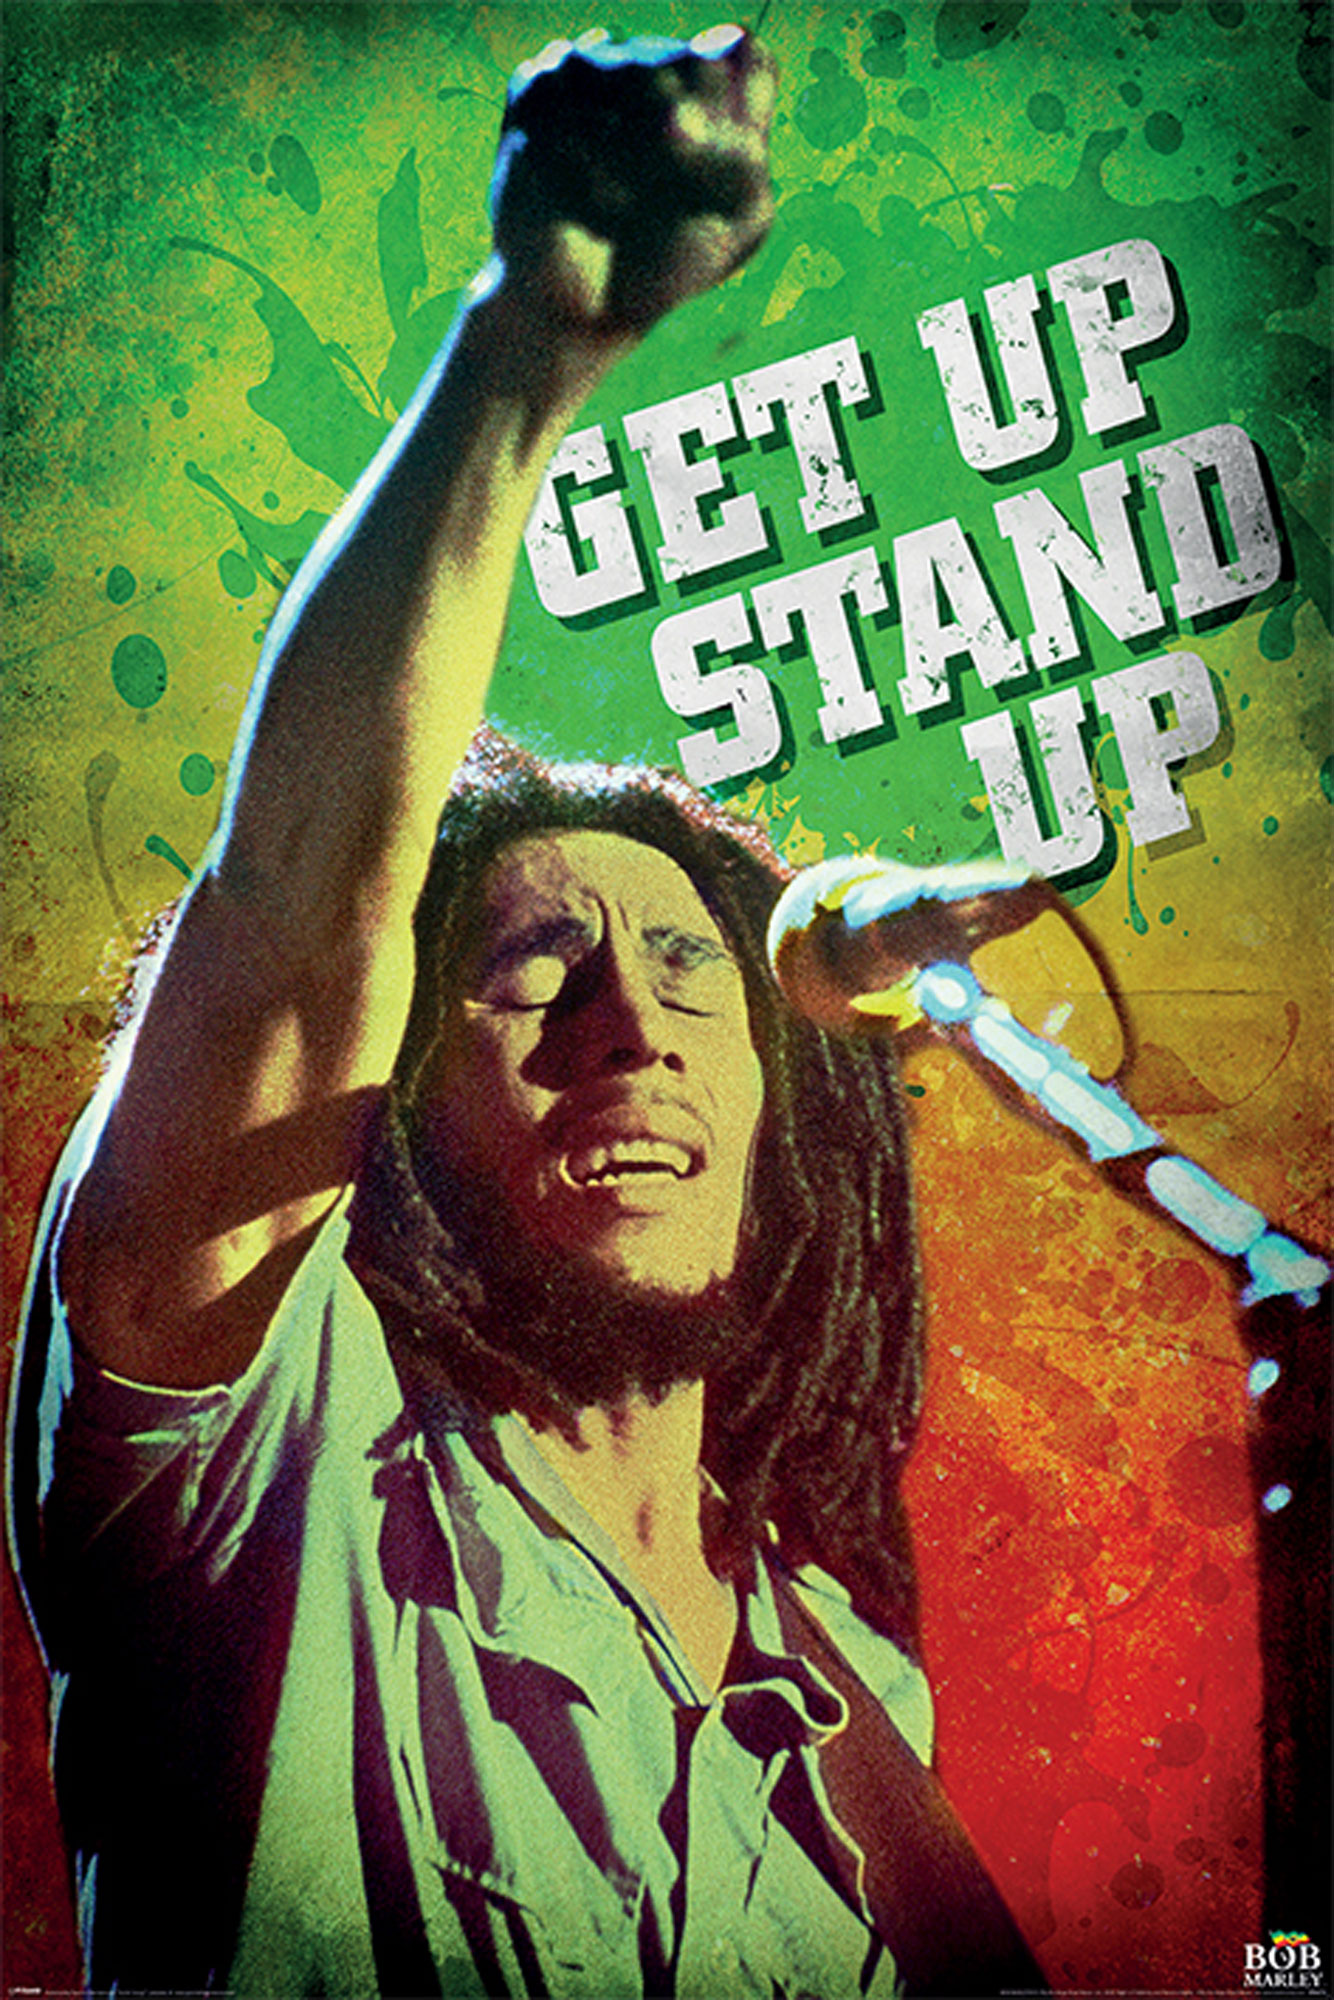 Marley, Bob Stand - Up Get Up